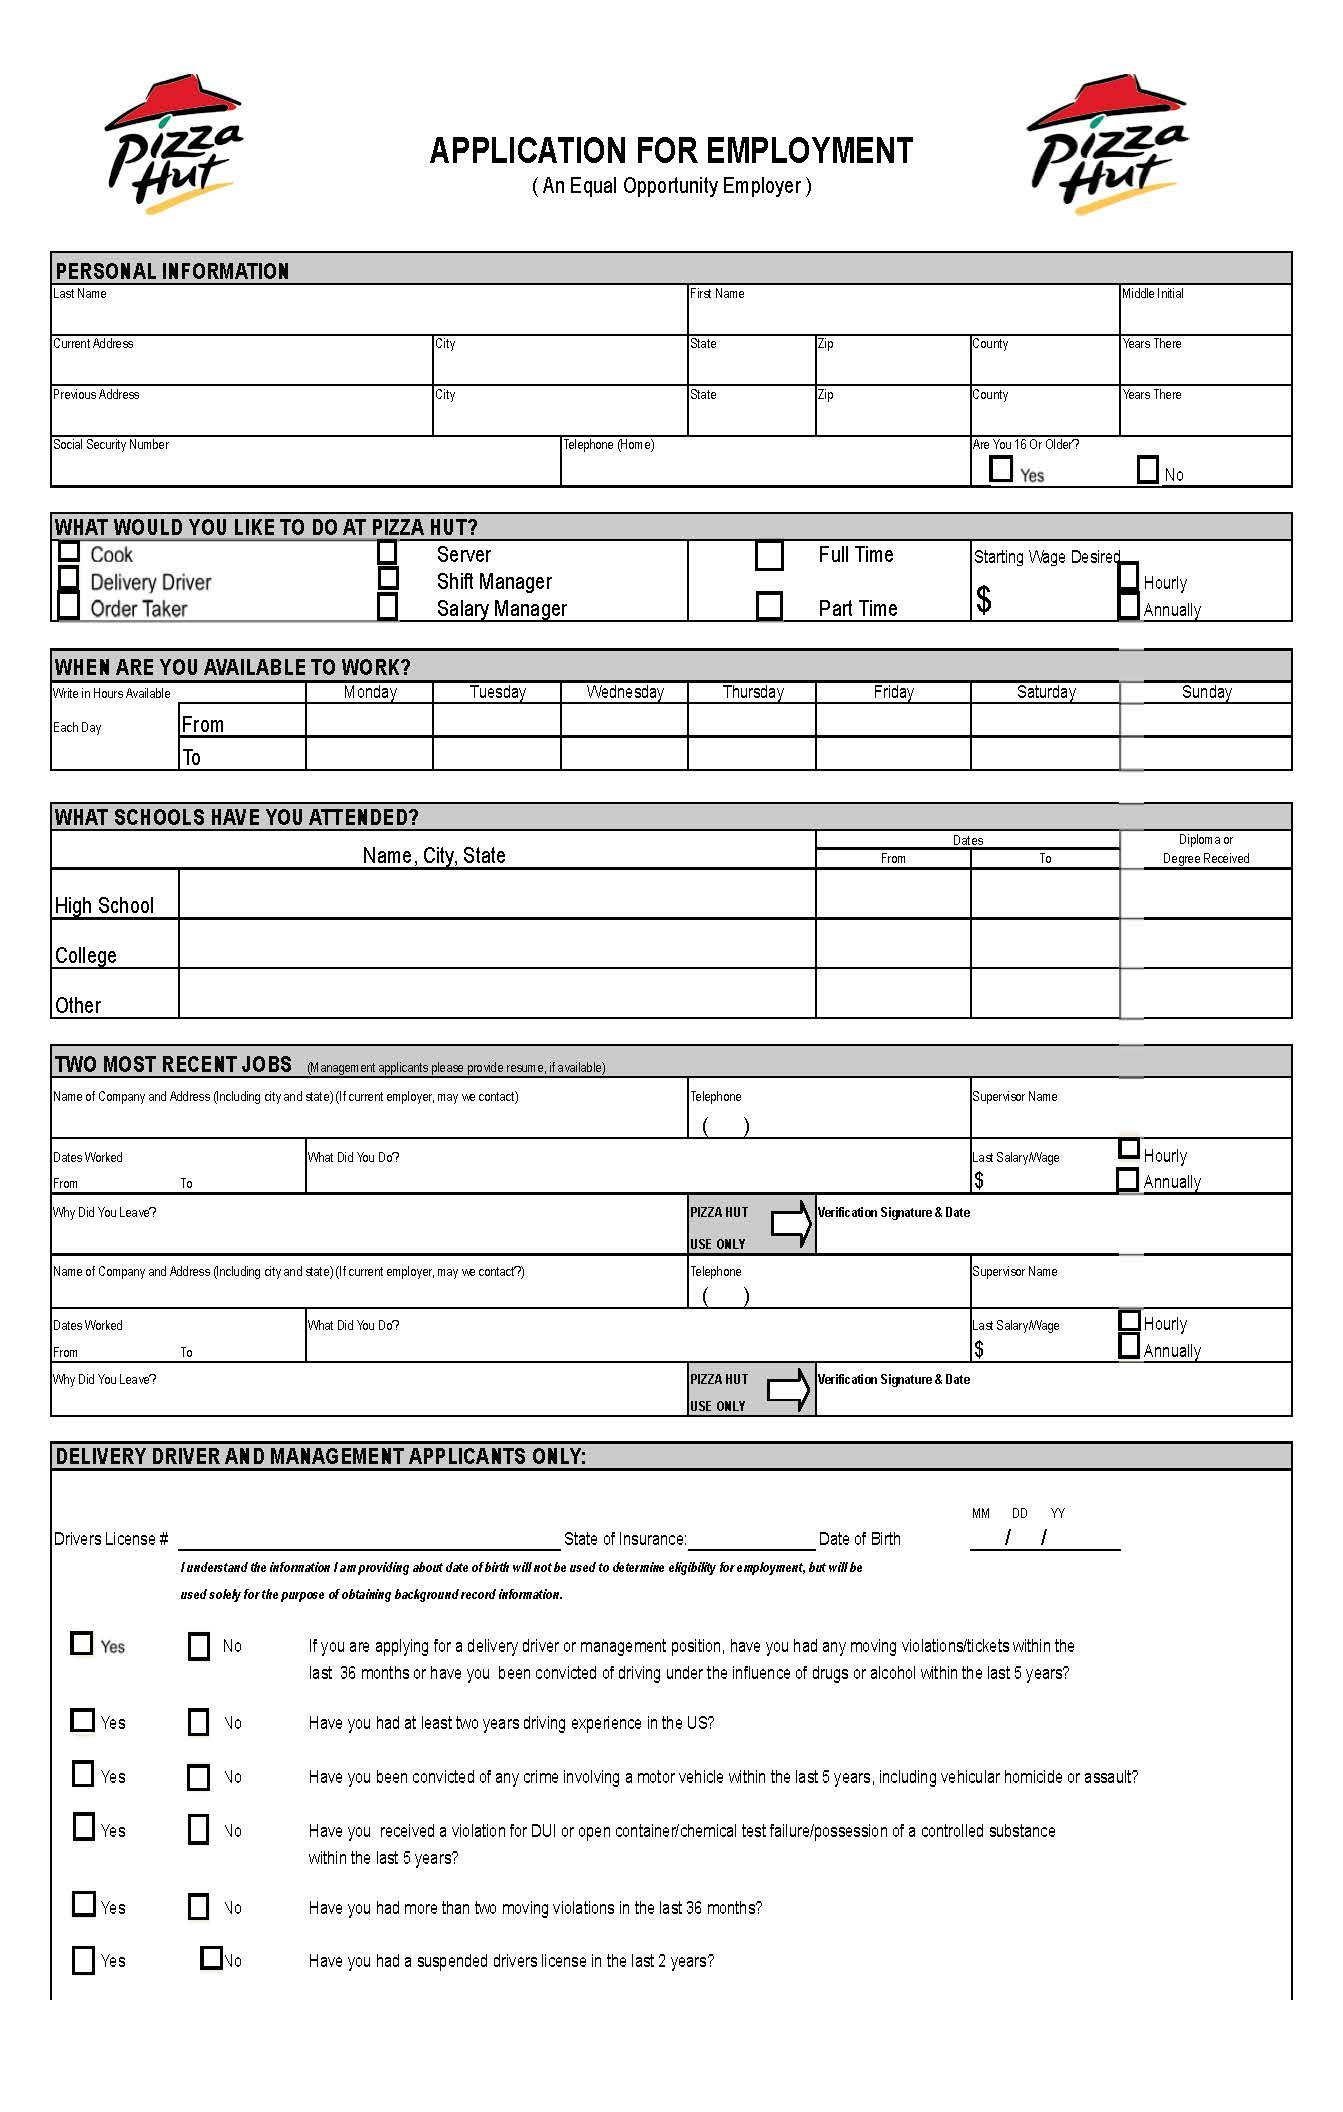 40 HQ Images Food 4 Less Application Form : Texas Food Stamps Application Form Online